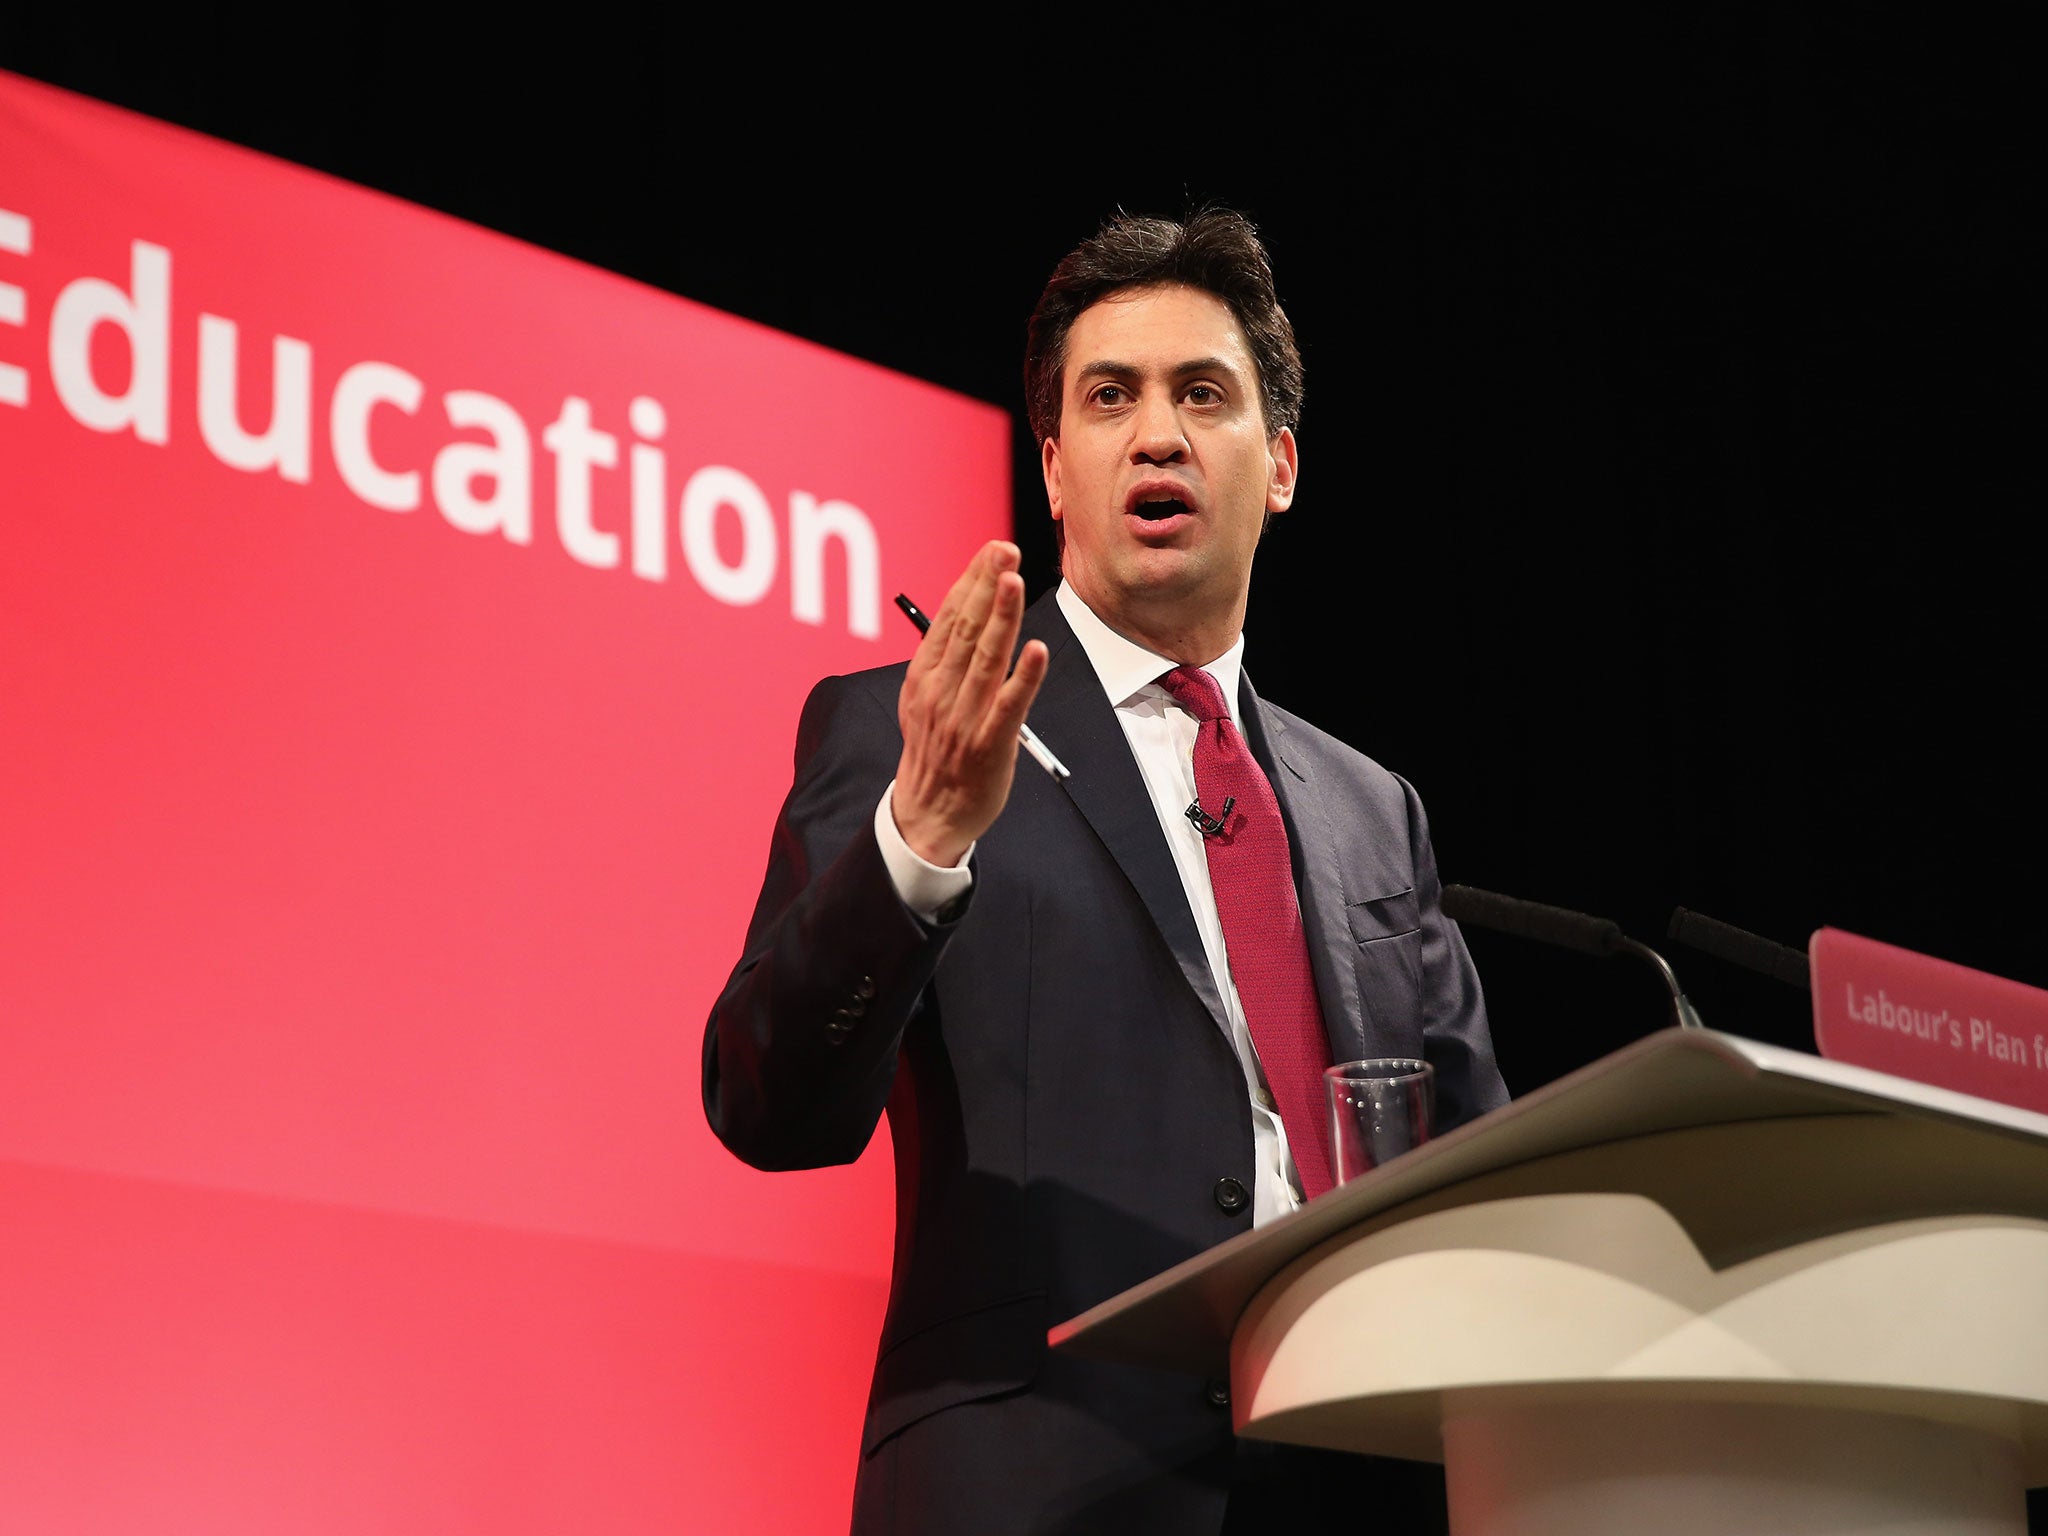 Labour leader Ed Miliband has stood by claims that Lord Fink avoided tax